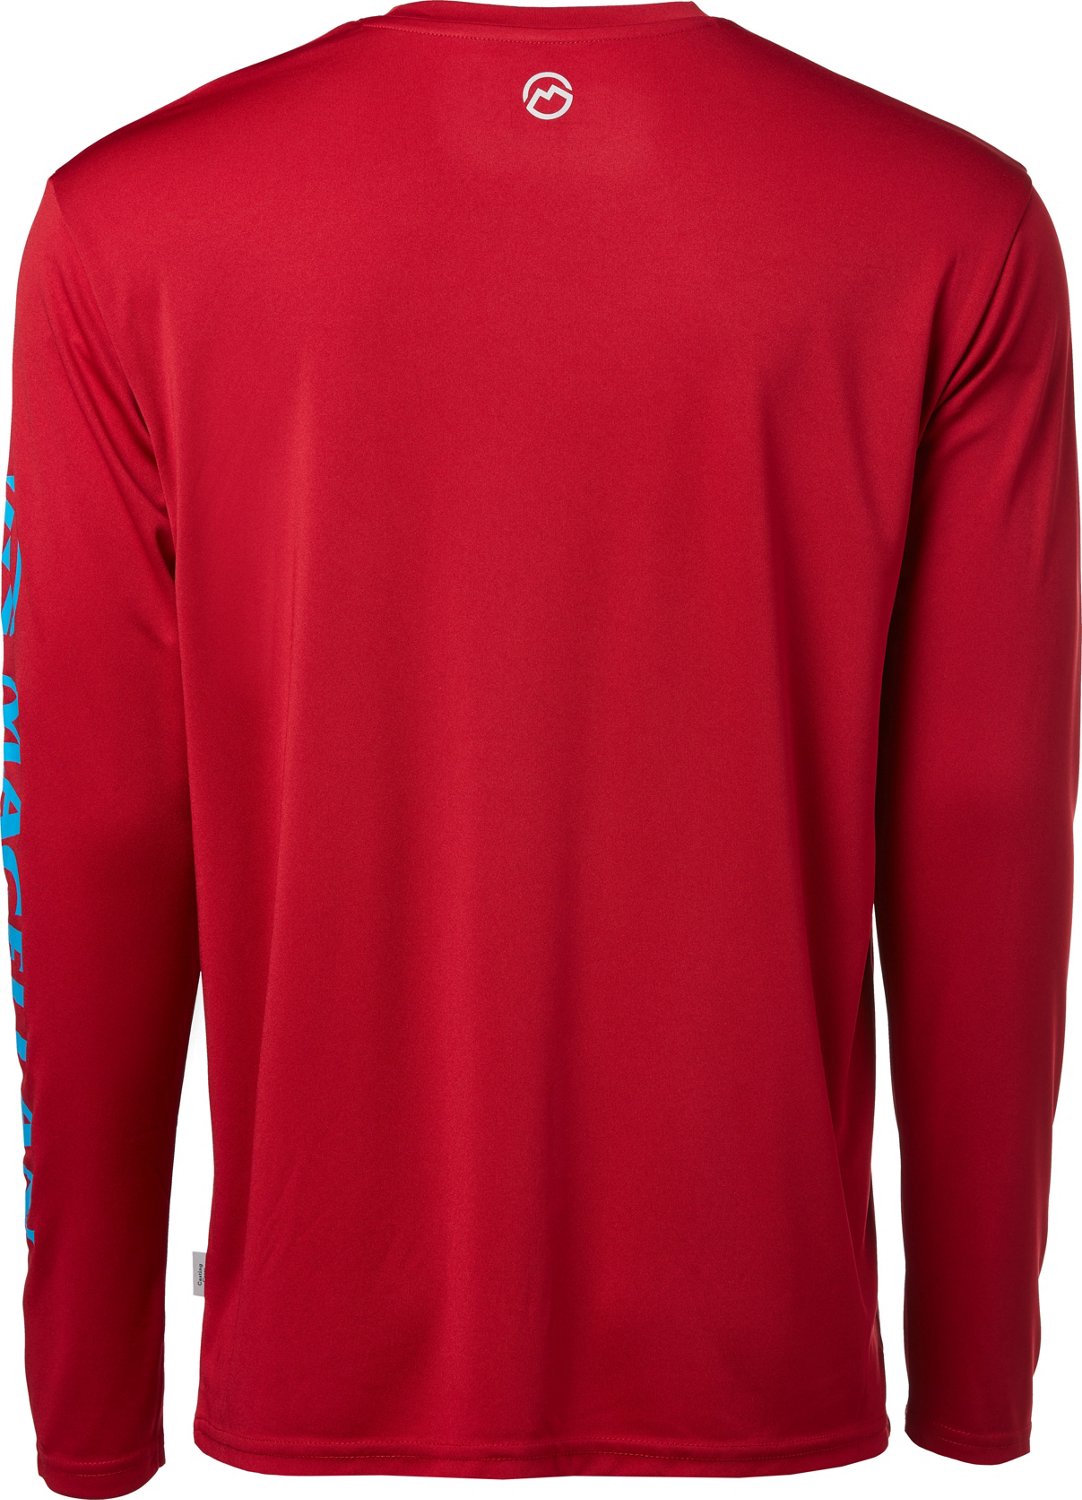 Mens Magellan Fish Gear Classic Fit Long Sleeve Casting Shirt Rio Red Size  3XL